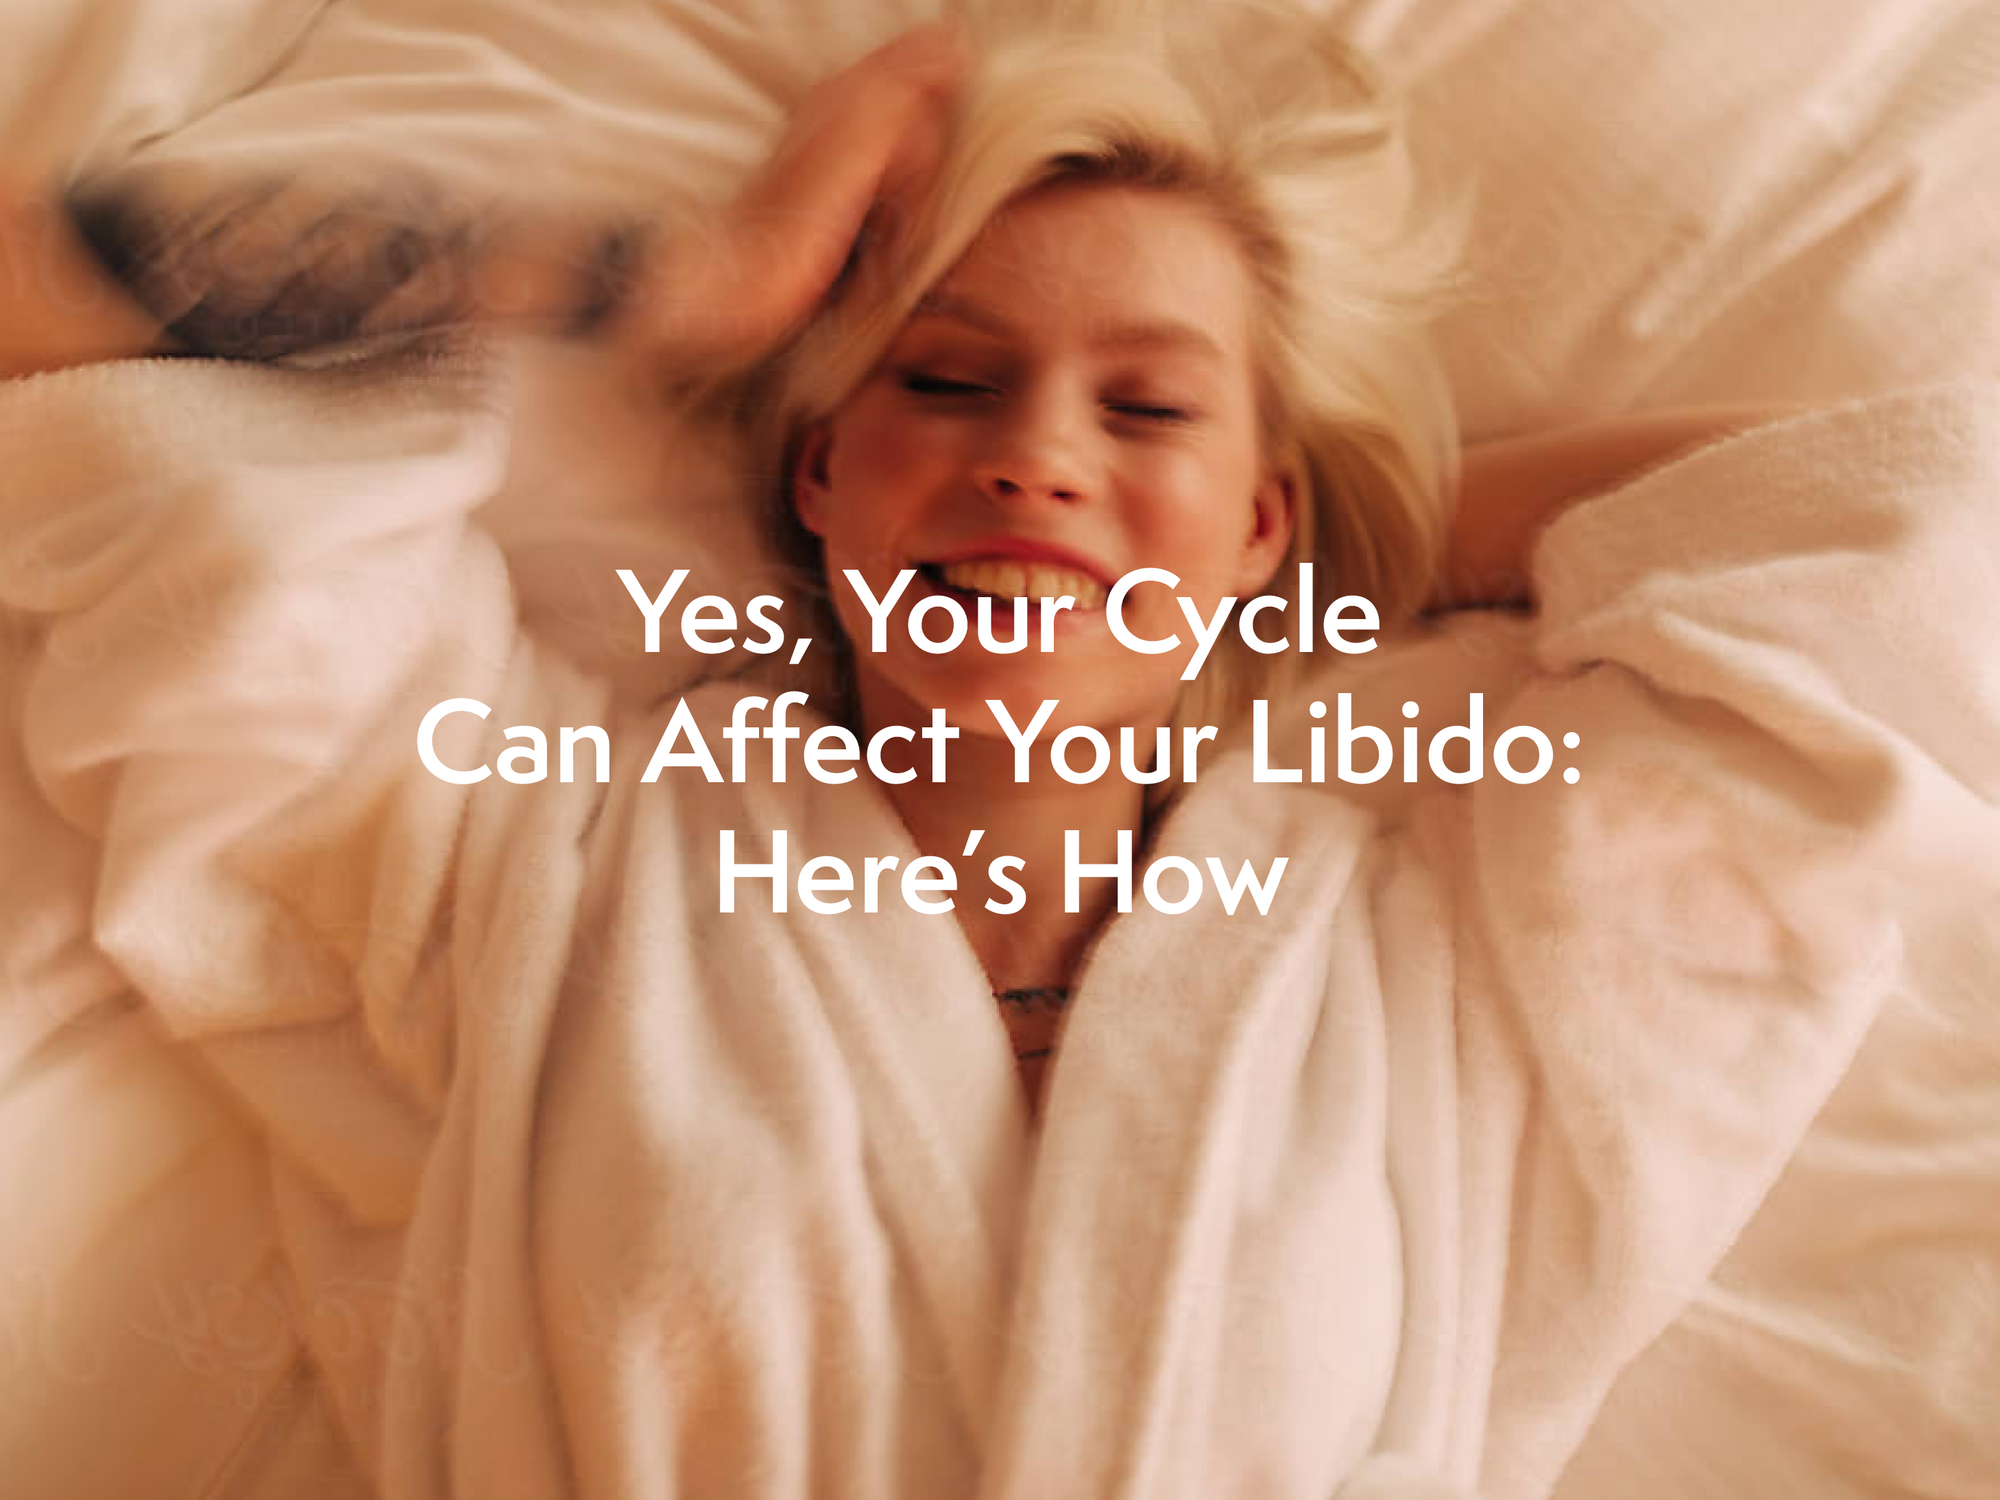 Yes Your Cycle Can Affect Your Libido: Here’s How